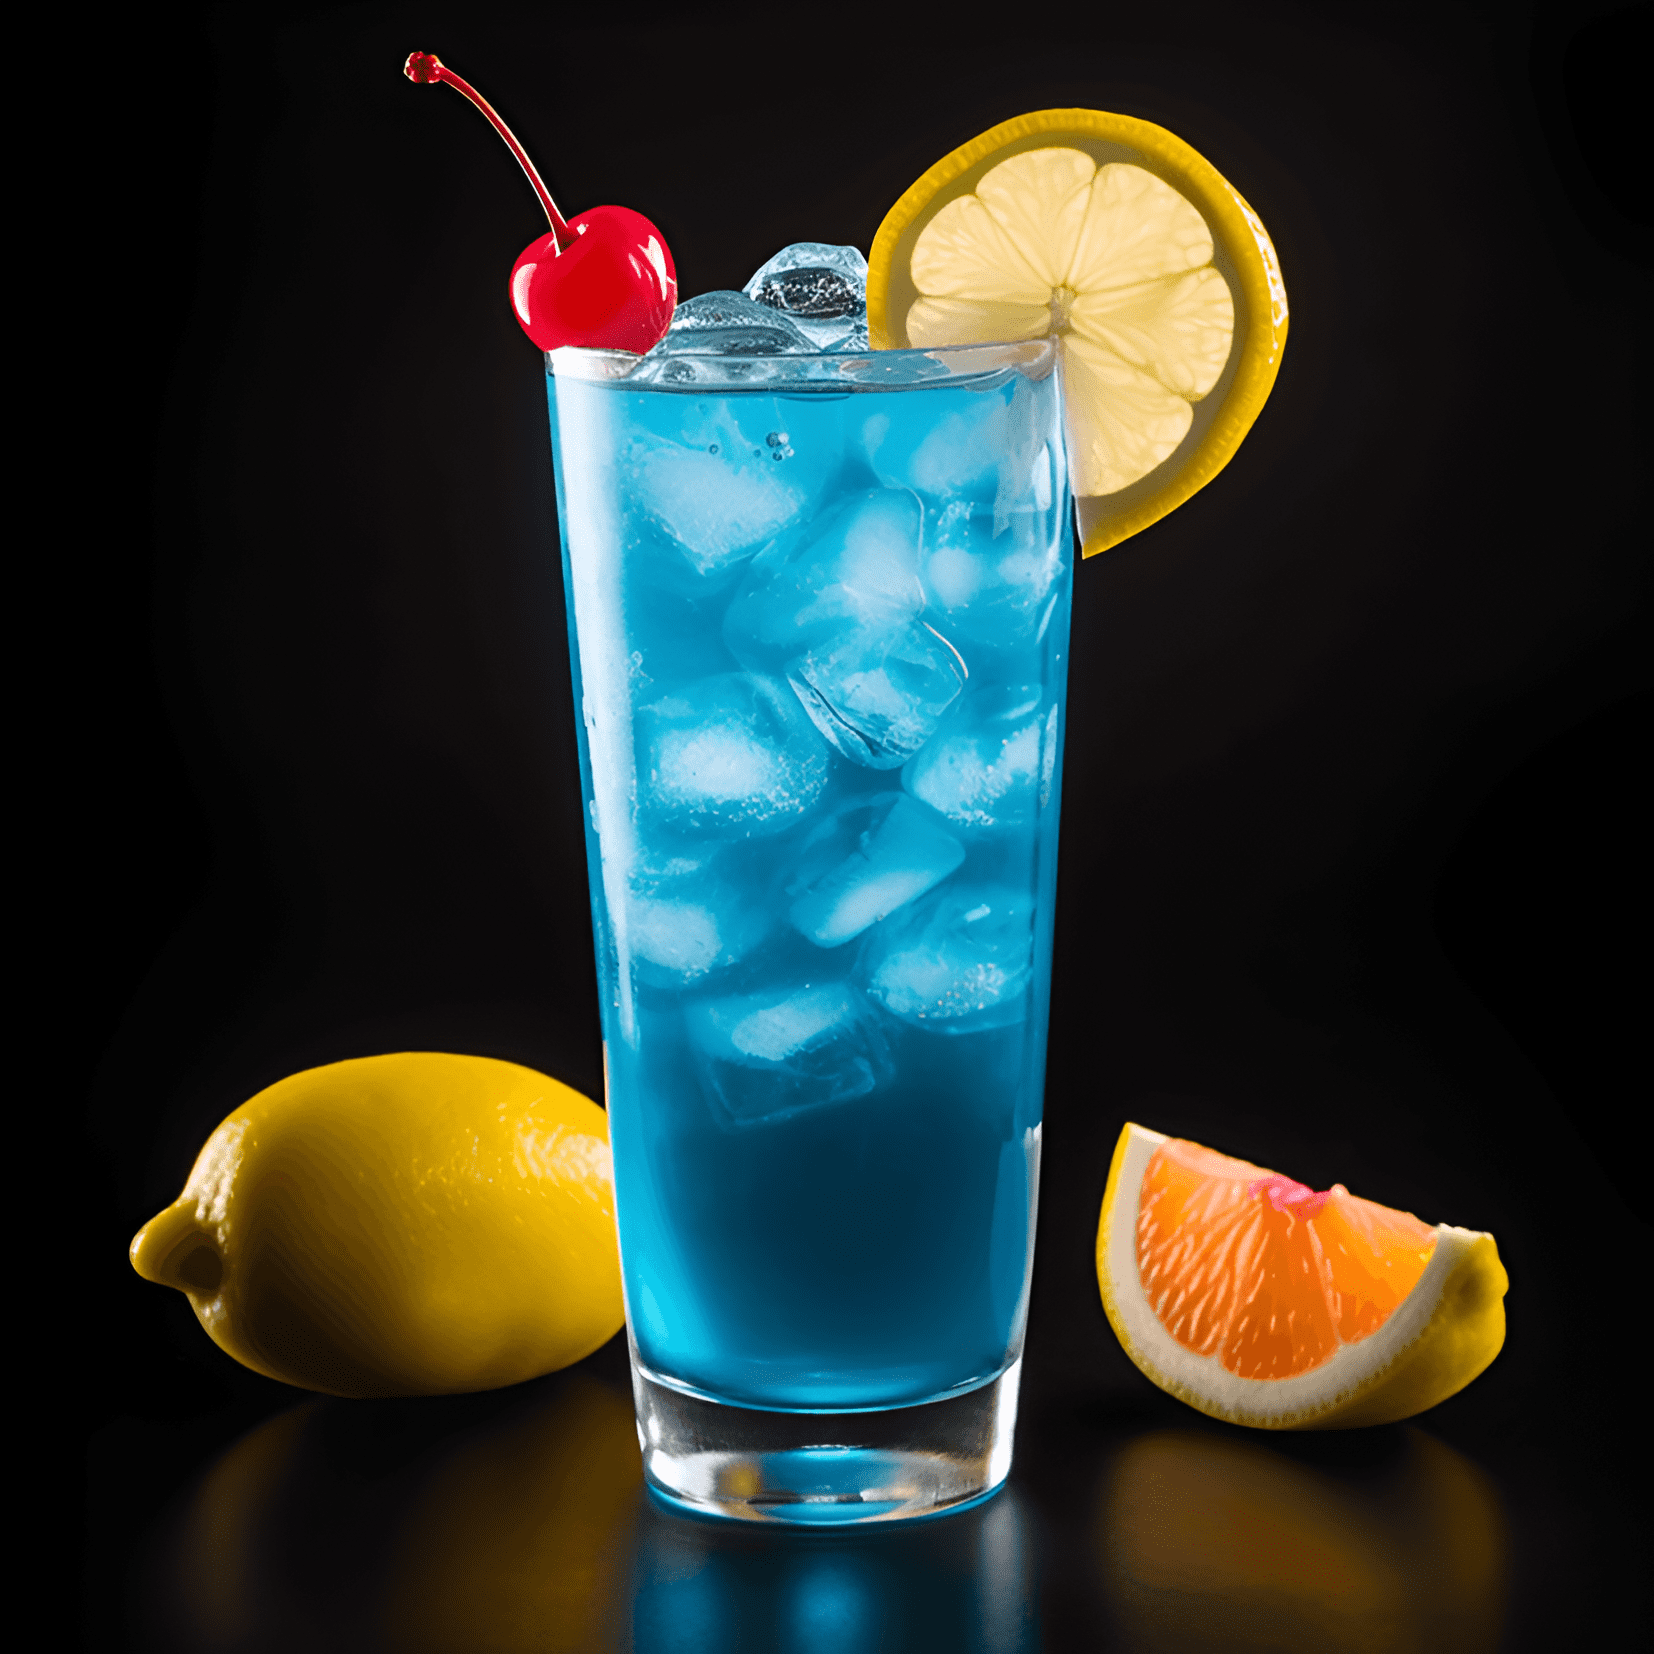 Electric Lemonade Cocktail Recipe - The Electric Lemonade is a sweet, tangy, and refreshing cocktail with a vibrant blue color. It has a perfect balance of sour and sweet flavors, with a hint of fizziness from the soda.